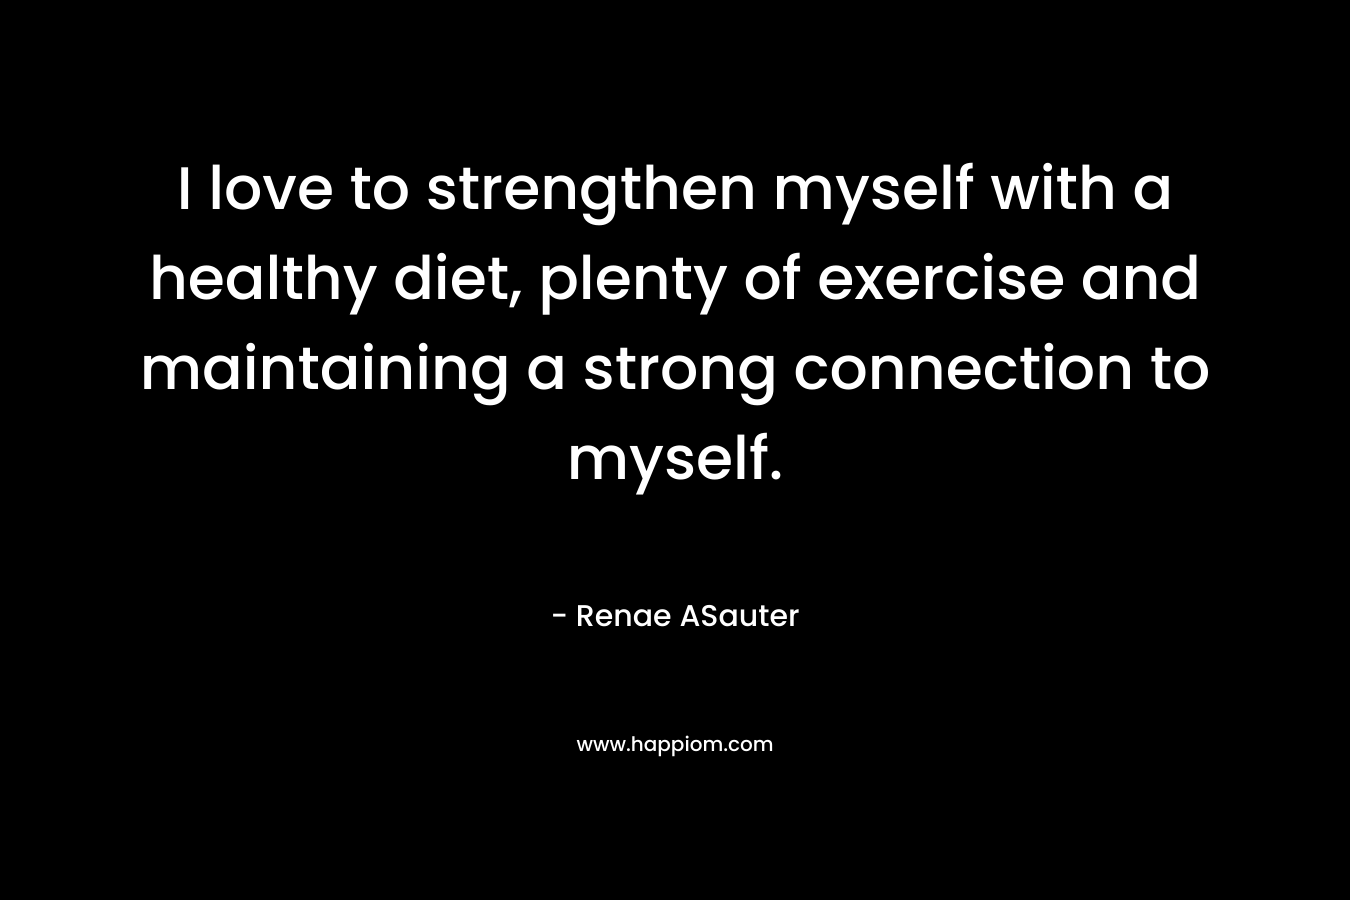 I love to strengthen myself with a healthy diet, plenty of exercise and maintaining a strong connection to myself.